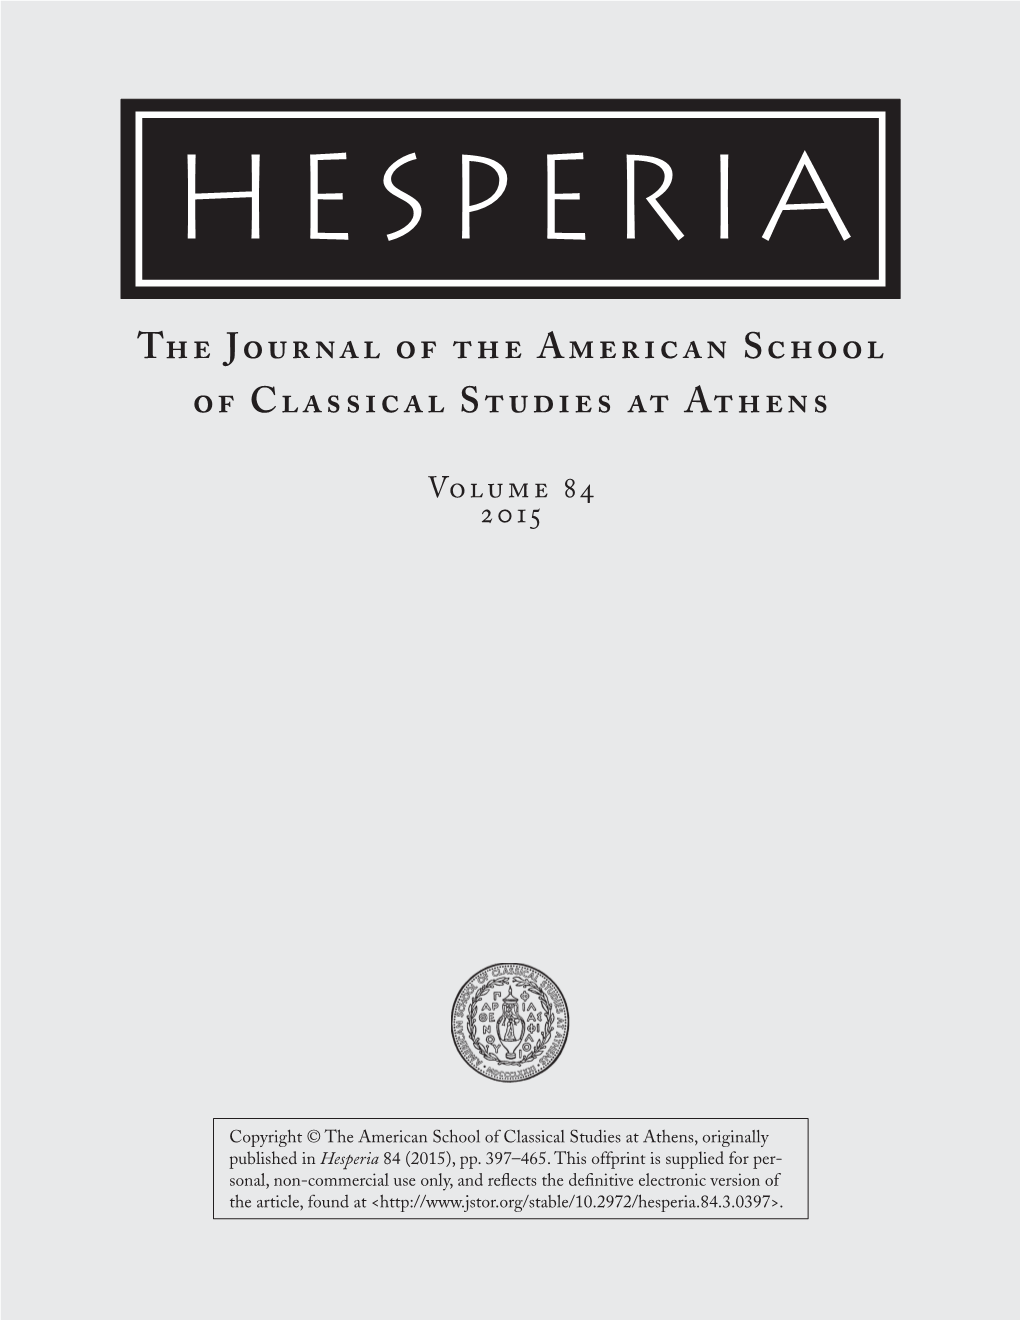 The Journal of the American School of Classical Studies at Athens